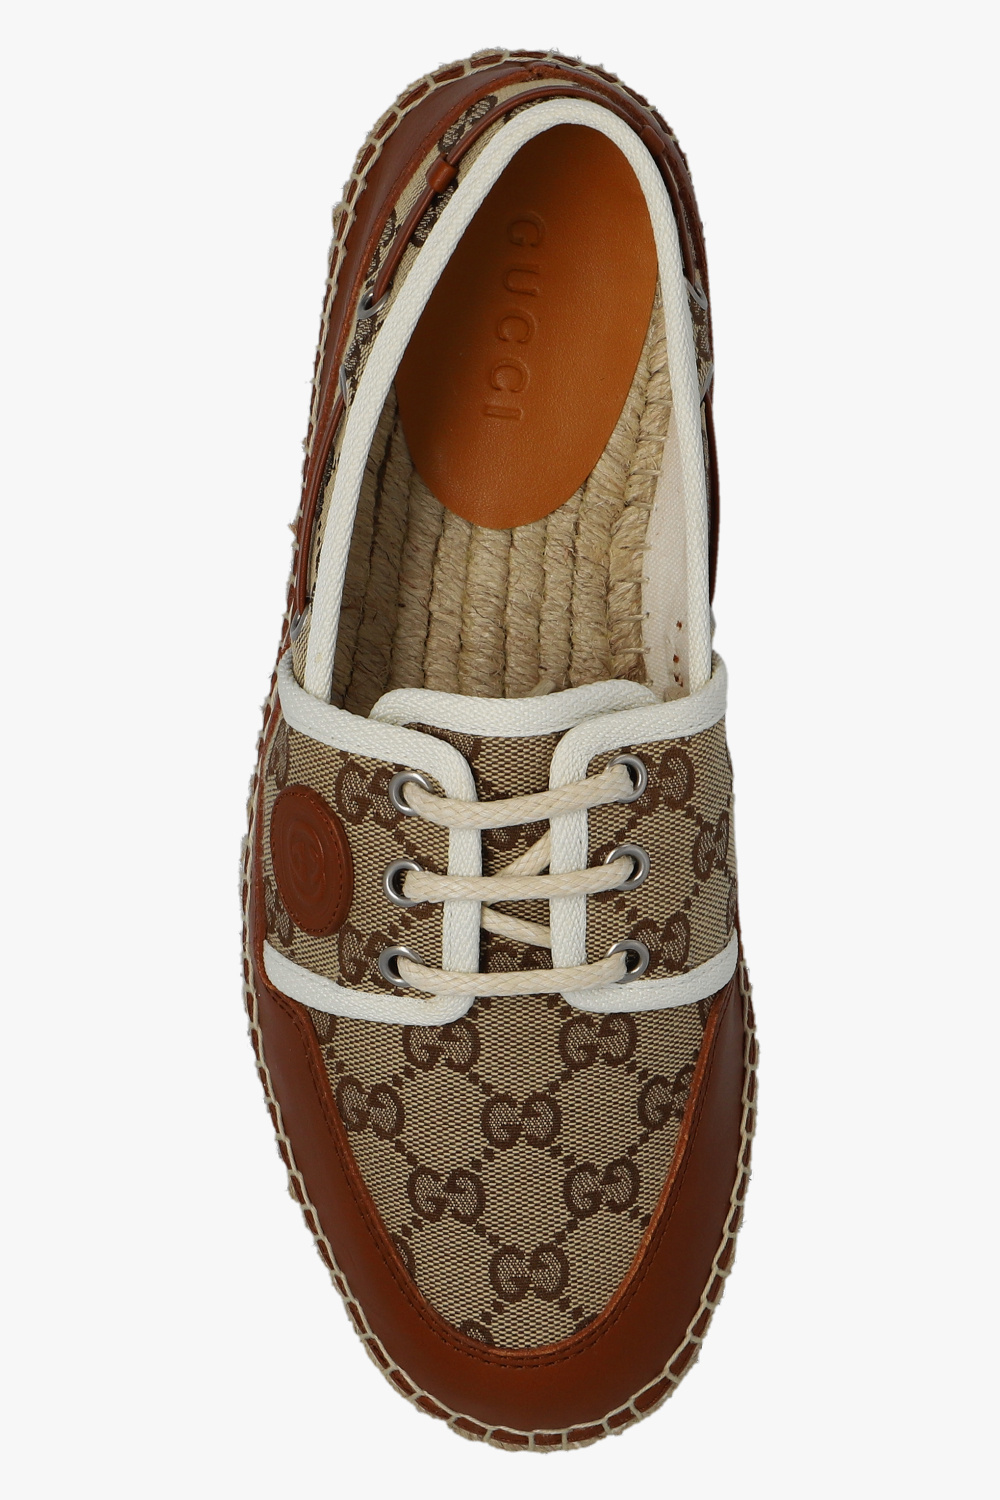 Gucci Eleventy almond-toe leather lace-up shoes stamp Braun